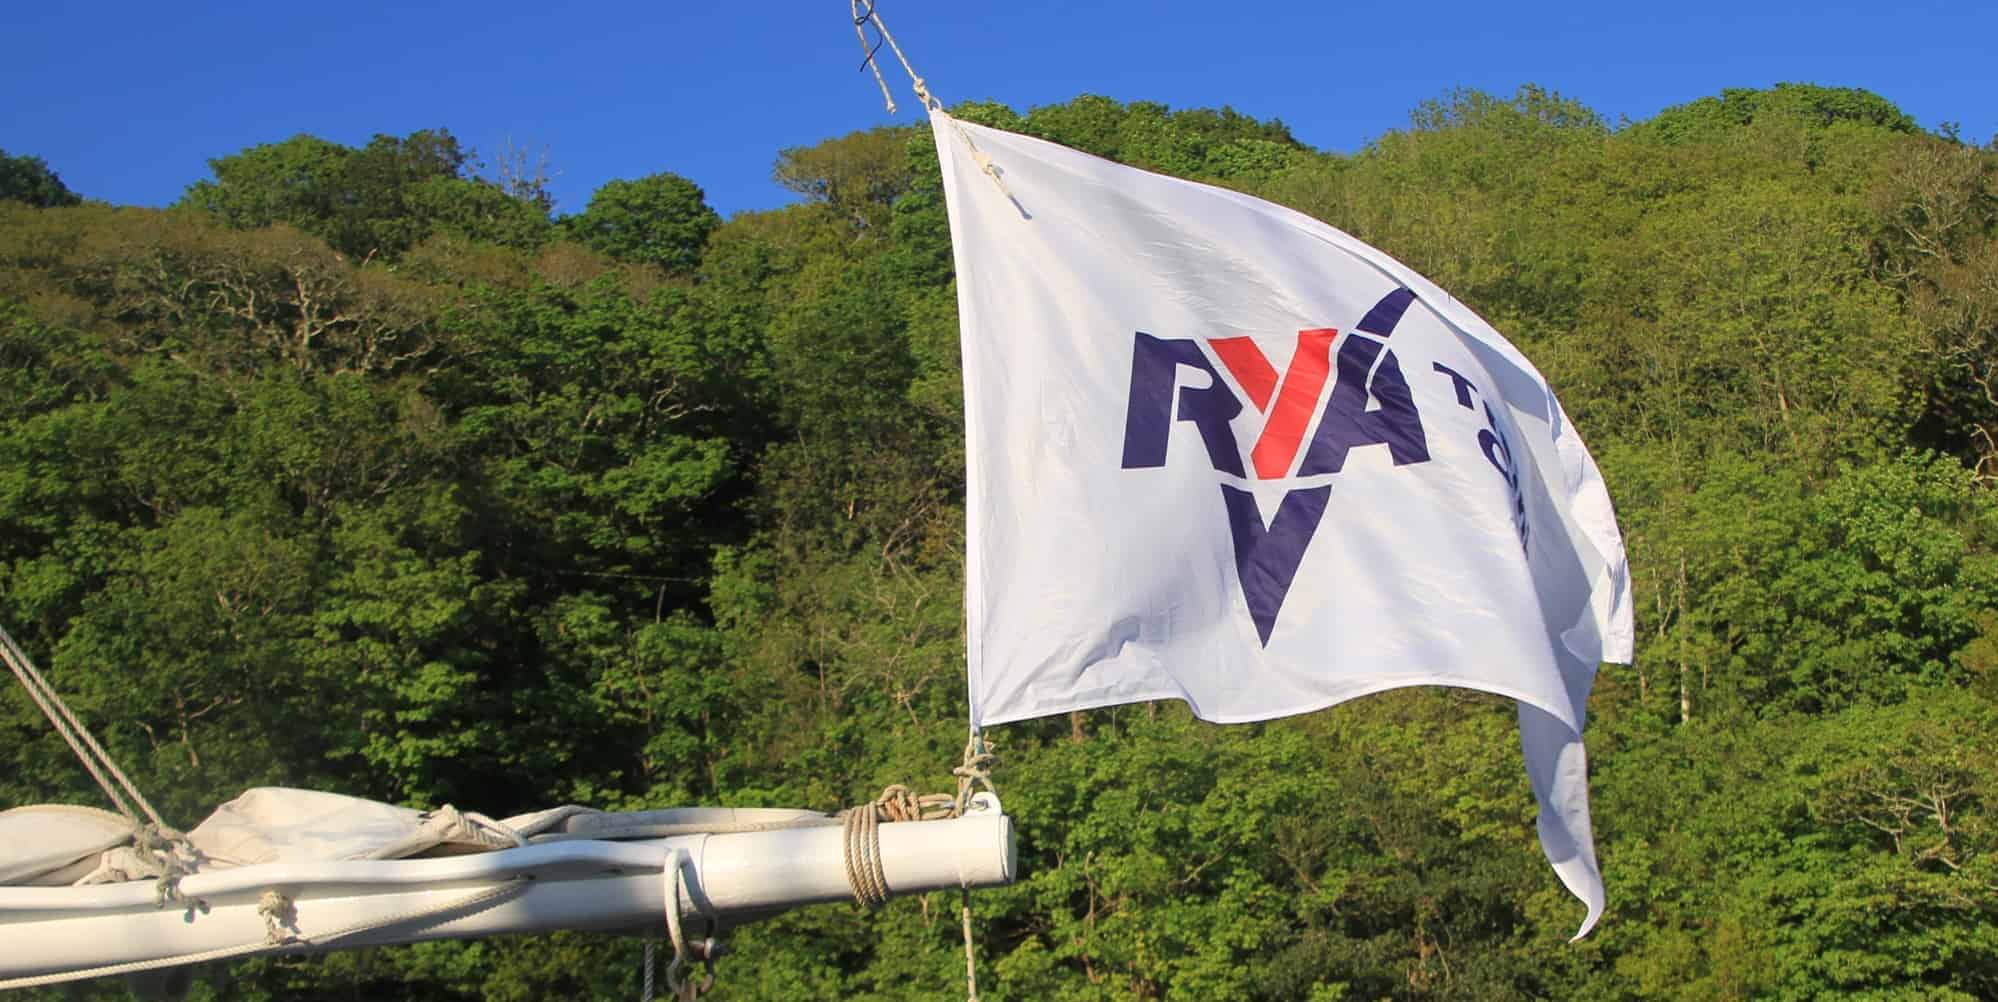 Take an RYA Course in the Autumn, September or October, uncrowded seas.